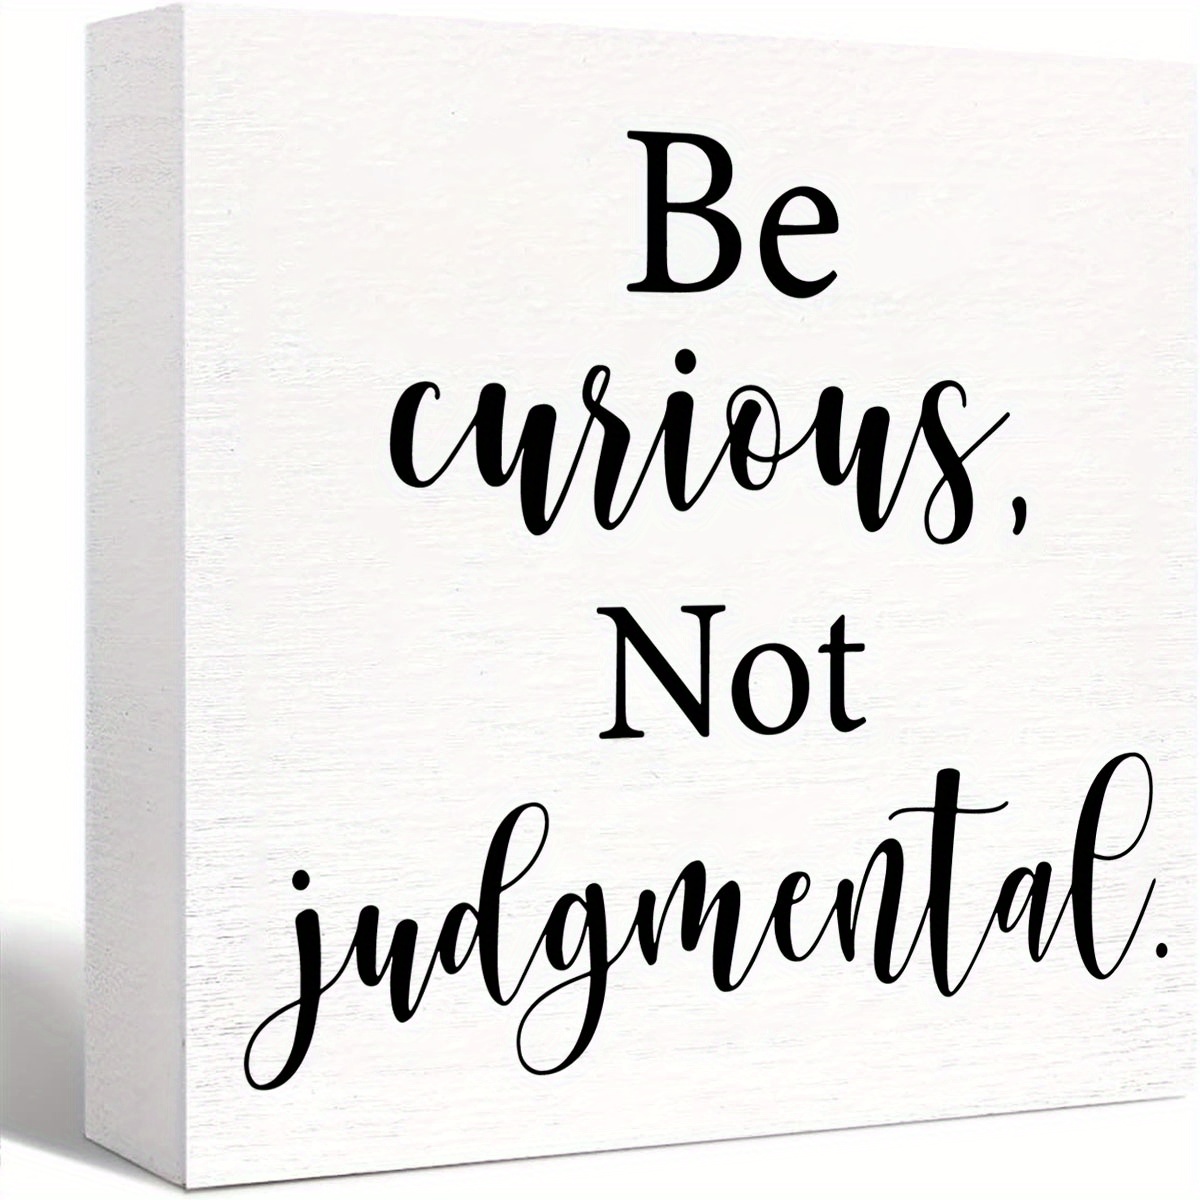 

1pc, Inspirational Wooden Box Sign, Decorative Motivational Be Curious Not Judgmental Wood Box Sign, Home Bedroom Office Decor Rustic Farmhouse Square Desk Decor Sign For Shelf